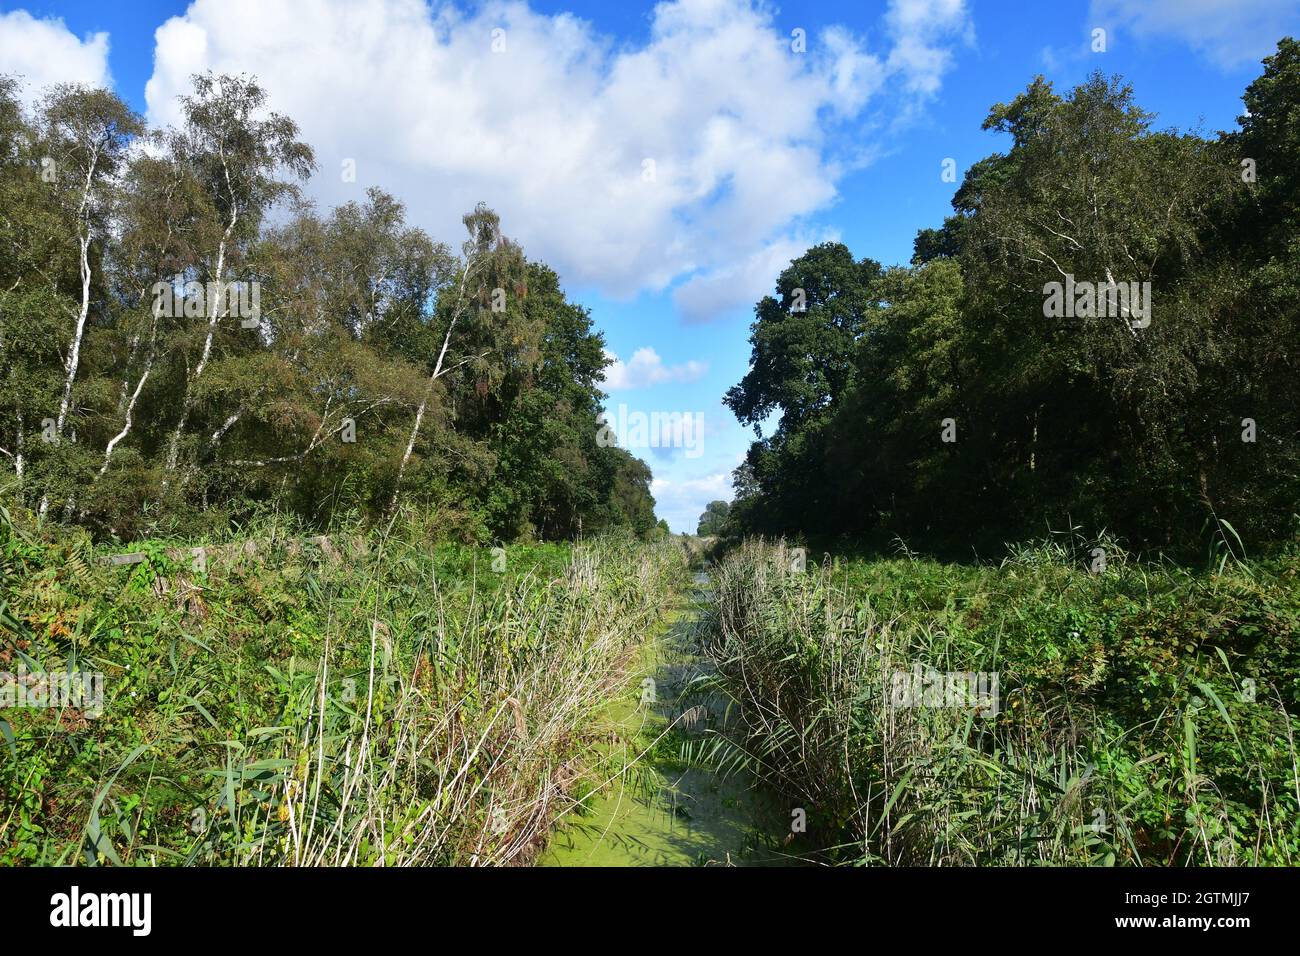 Holme Fen National Nature Reserve, part of the Great Fen near Ramsey St Mary, Cambridgeshire, UK Stock Photo